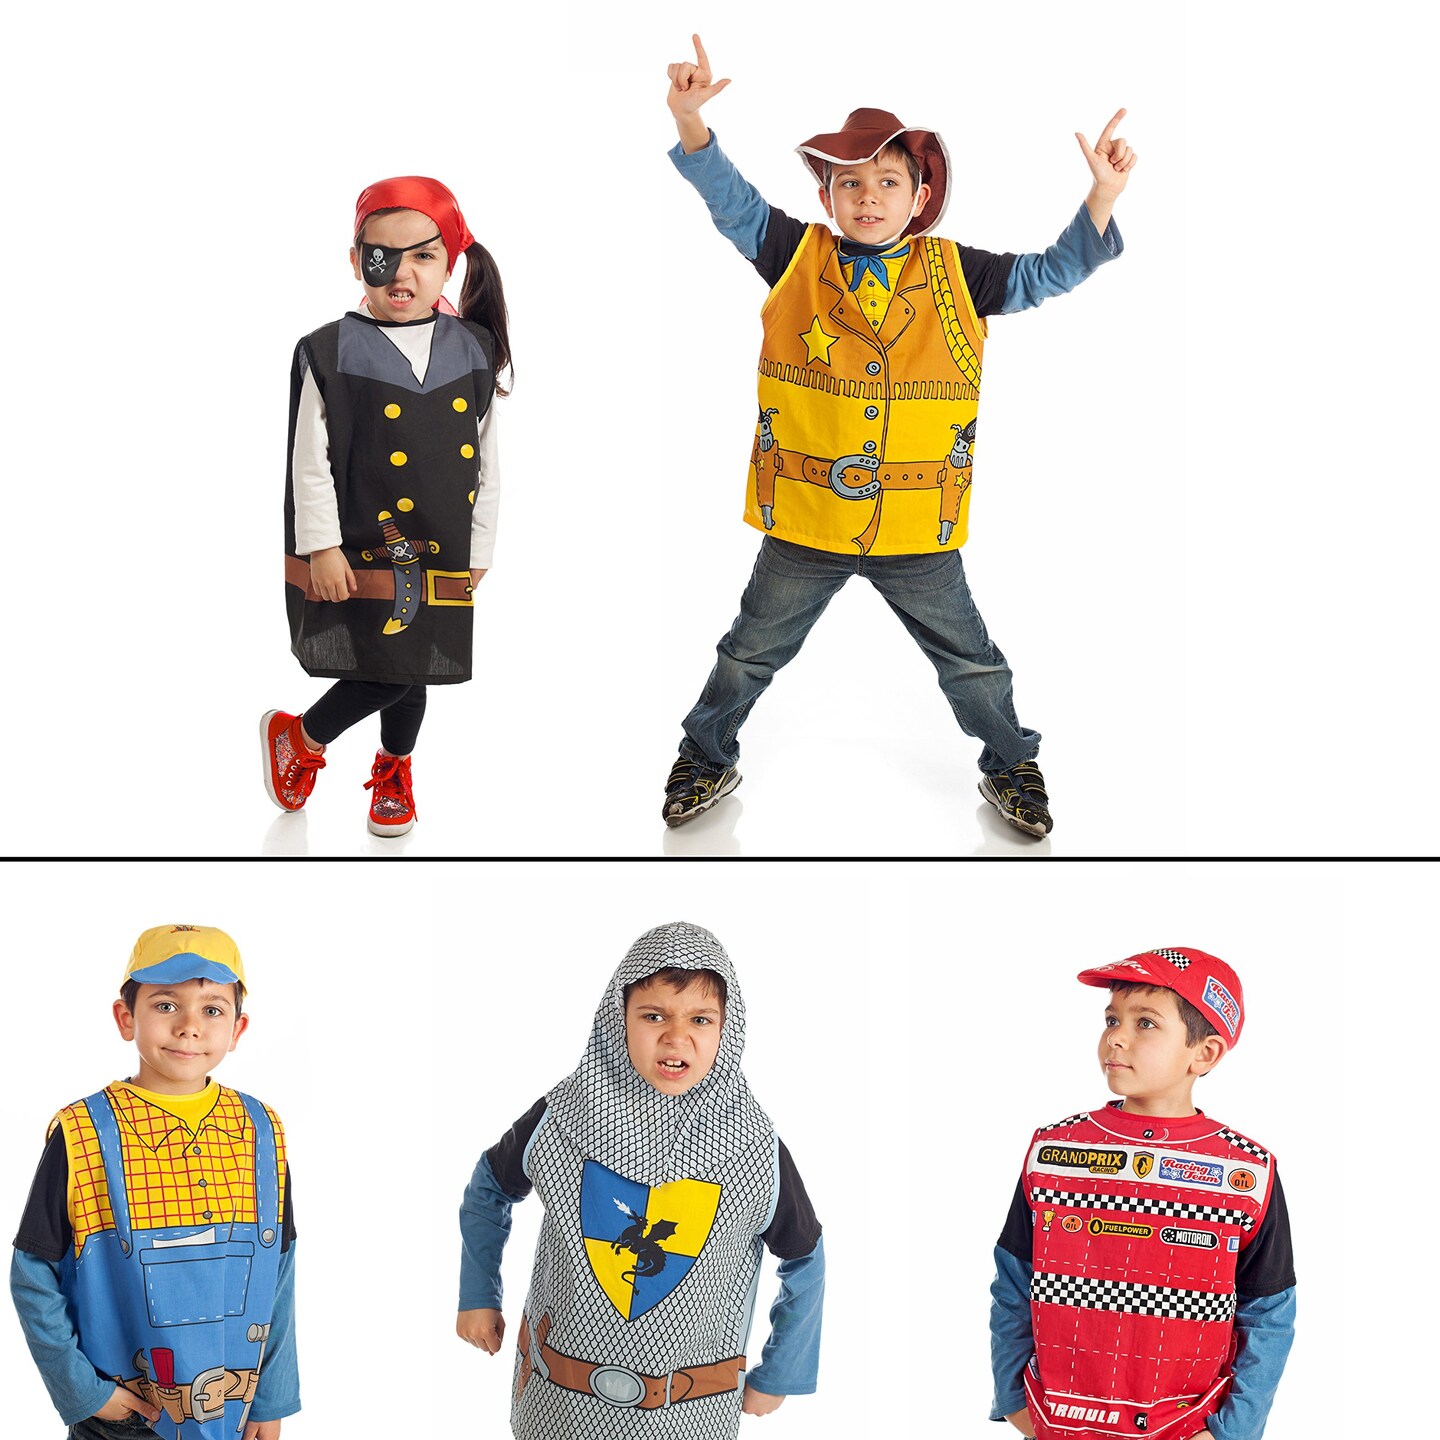 IQ Toys Boys and Girls Costumes Dress Up costumes play Set - 11 Pc Pretend Set for Kids Comes with Car Racer, Knight, Cowboy, Construction Worker, and Pirate Costume